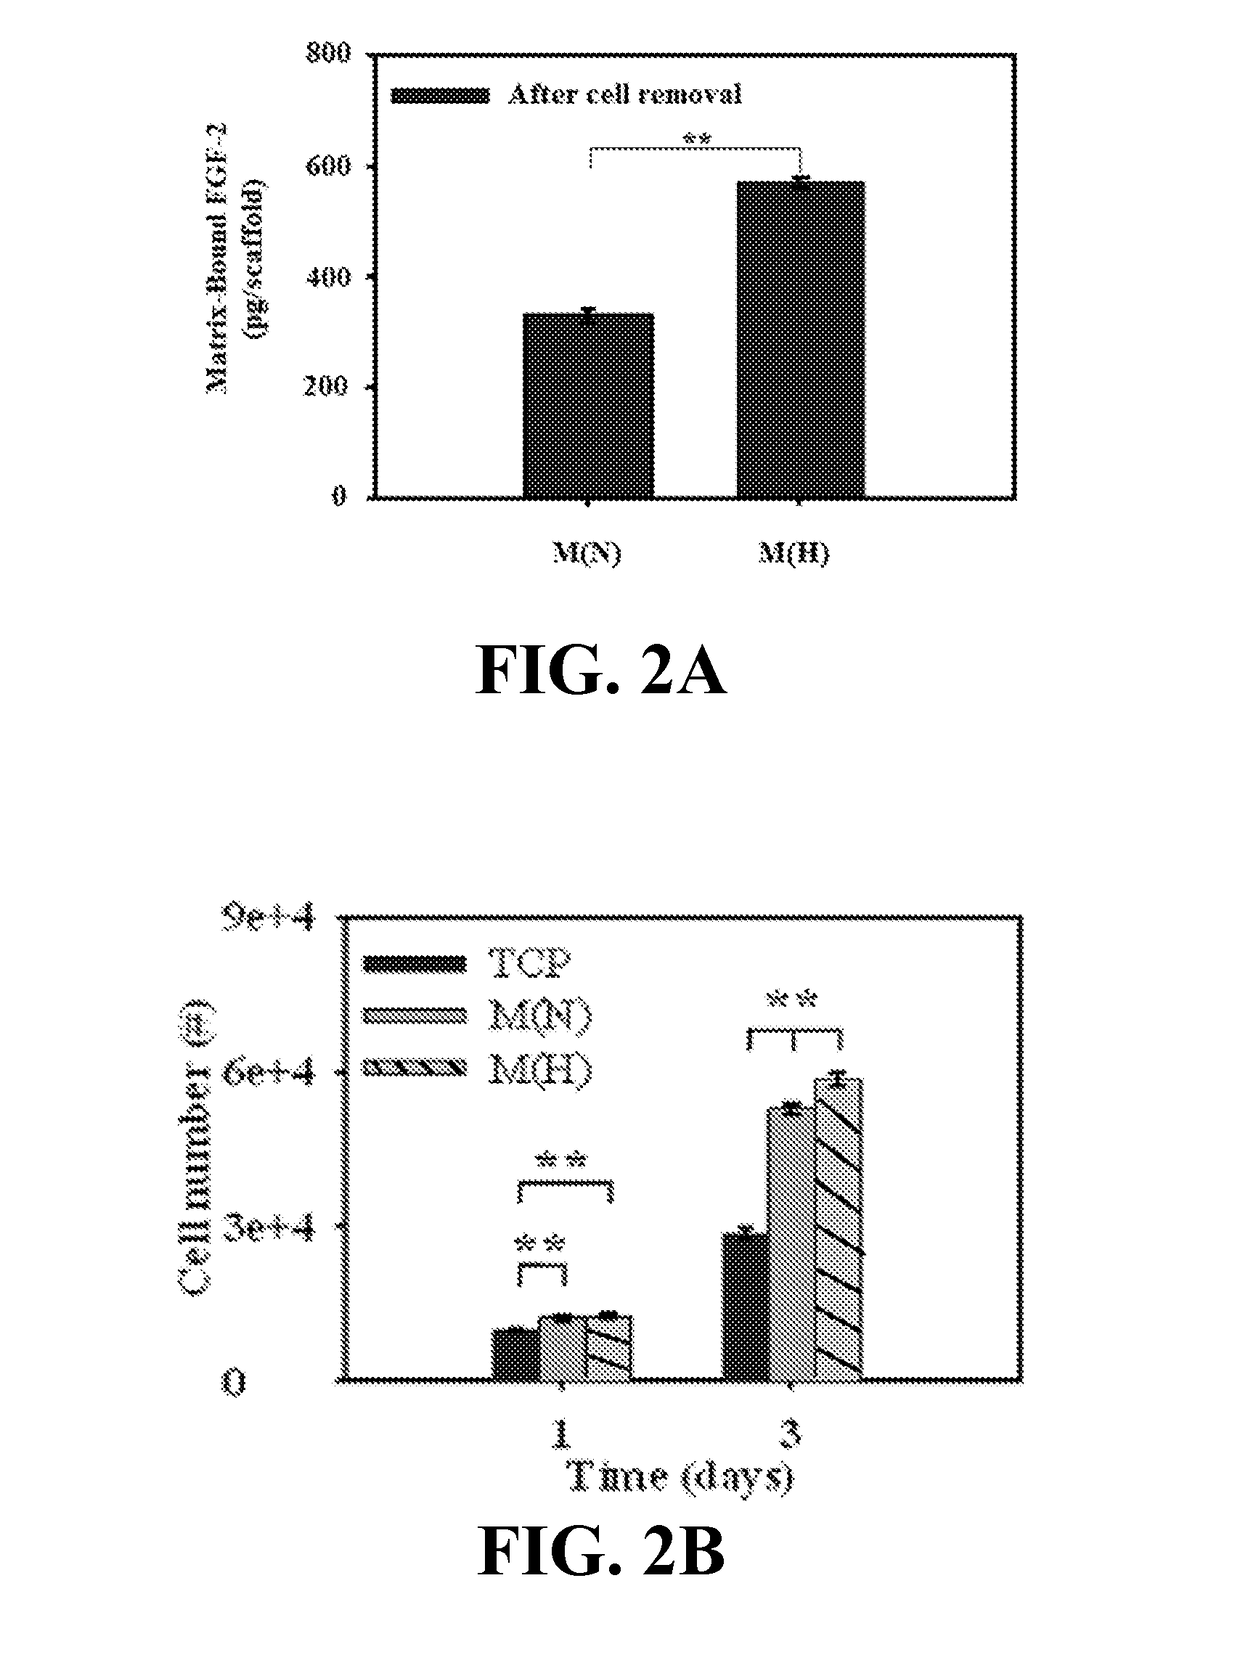 Materials and methods for expansion of stem cells